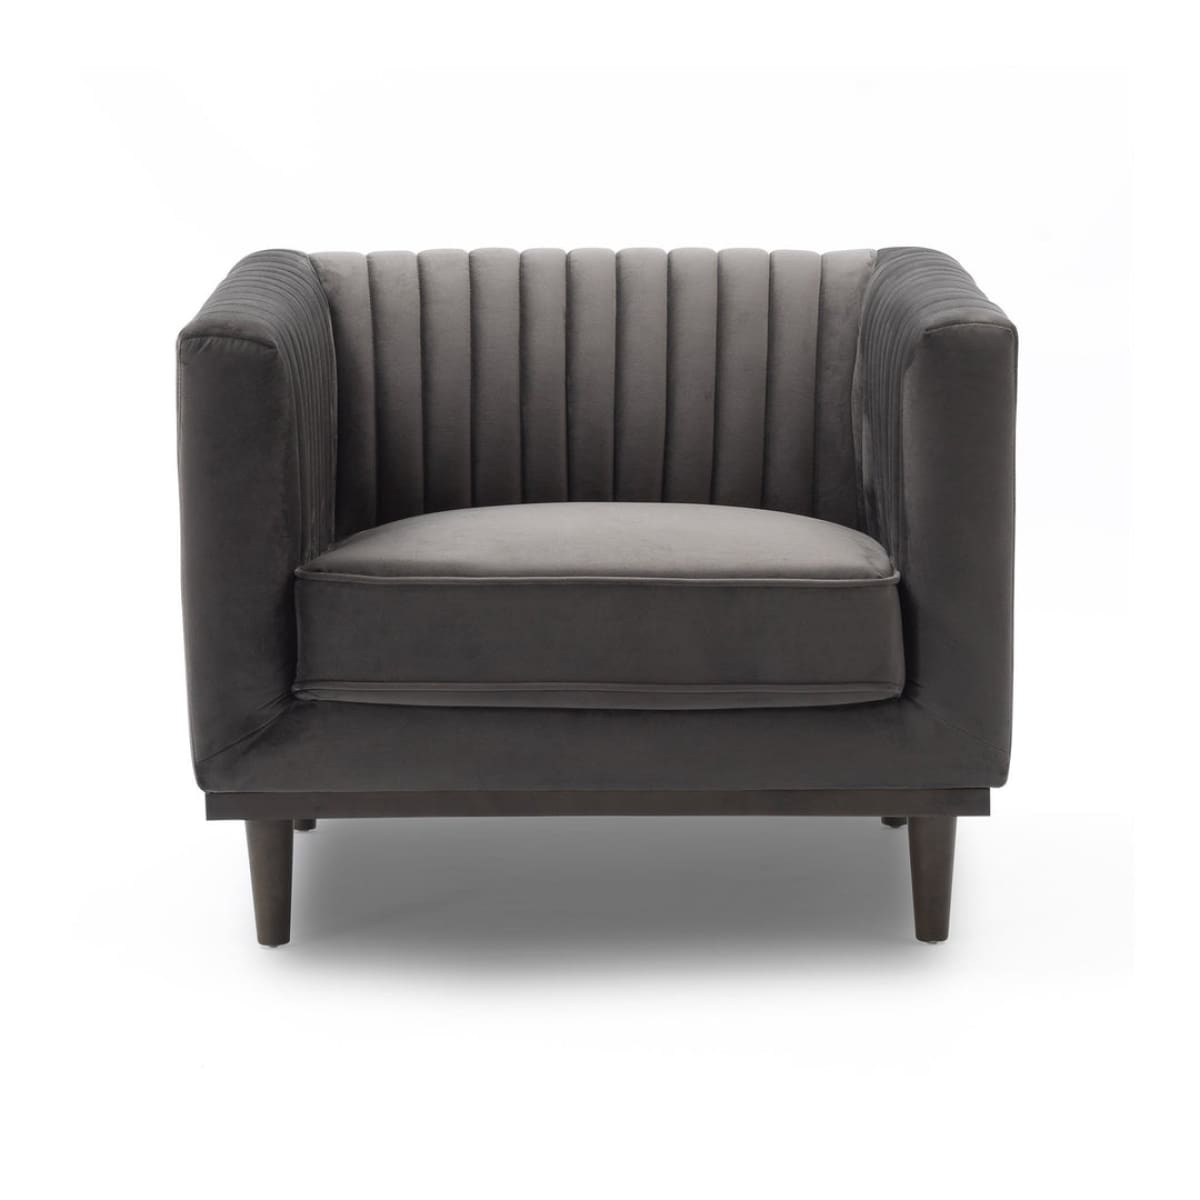 Sage Club Chair - Stone Grey Velvet - lh-import-accent-club-chairs